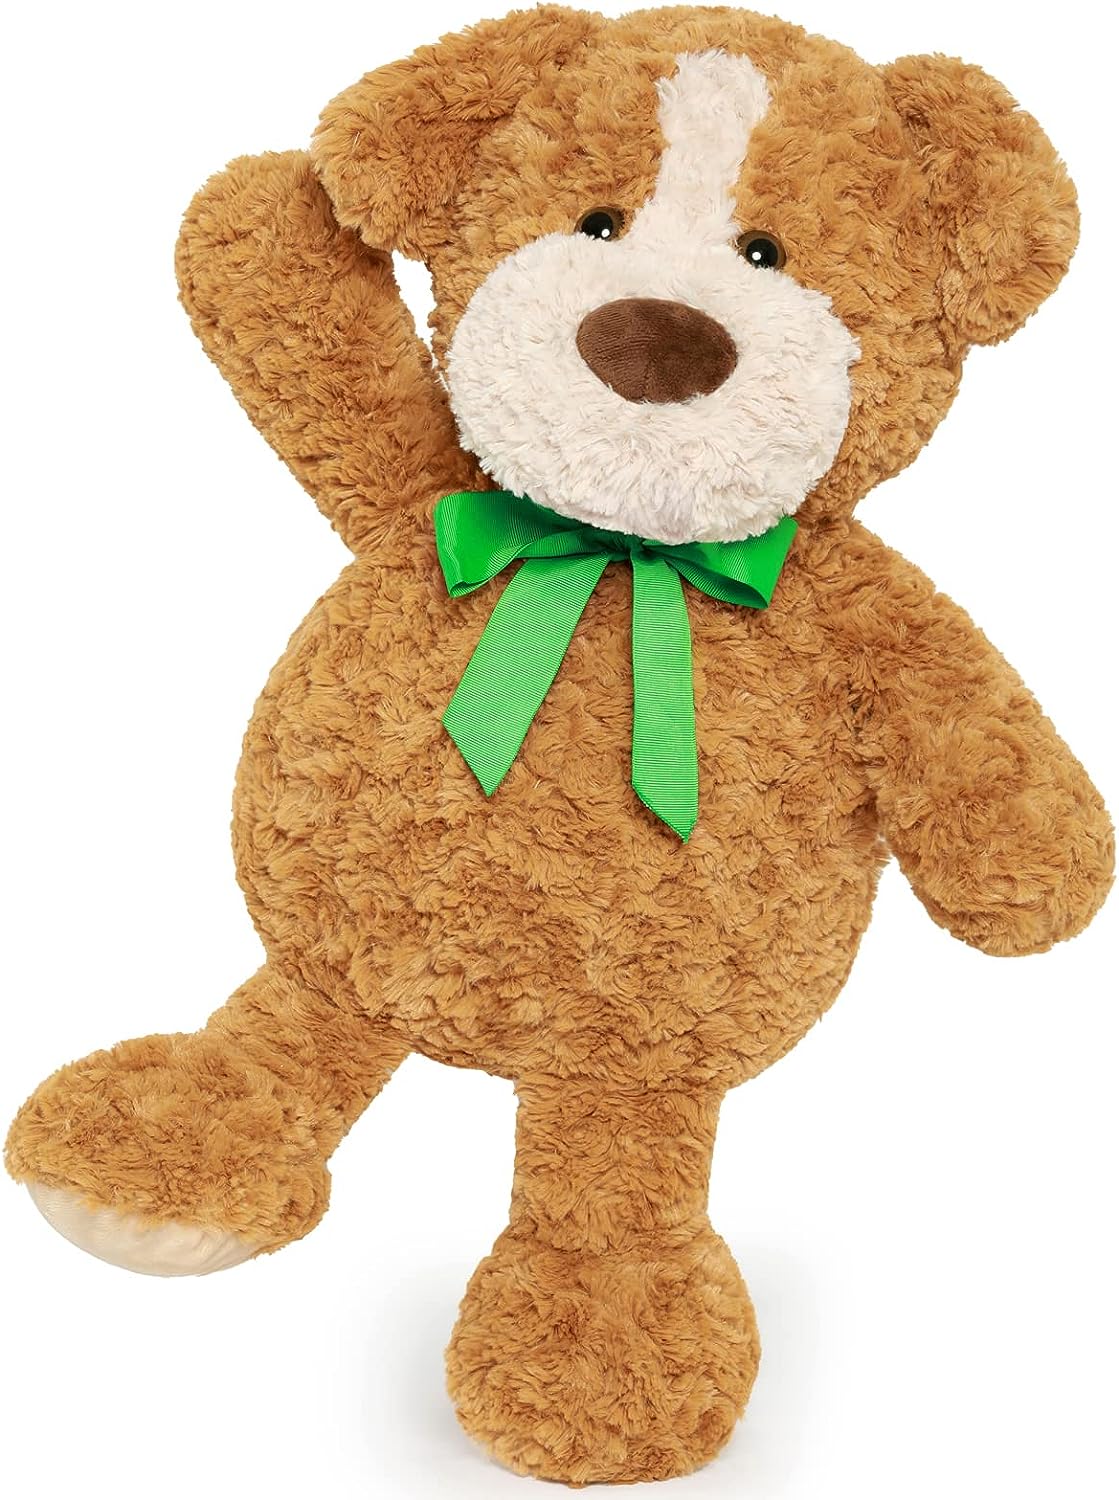 Adorable Dog Plush Toy, 24 Inches